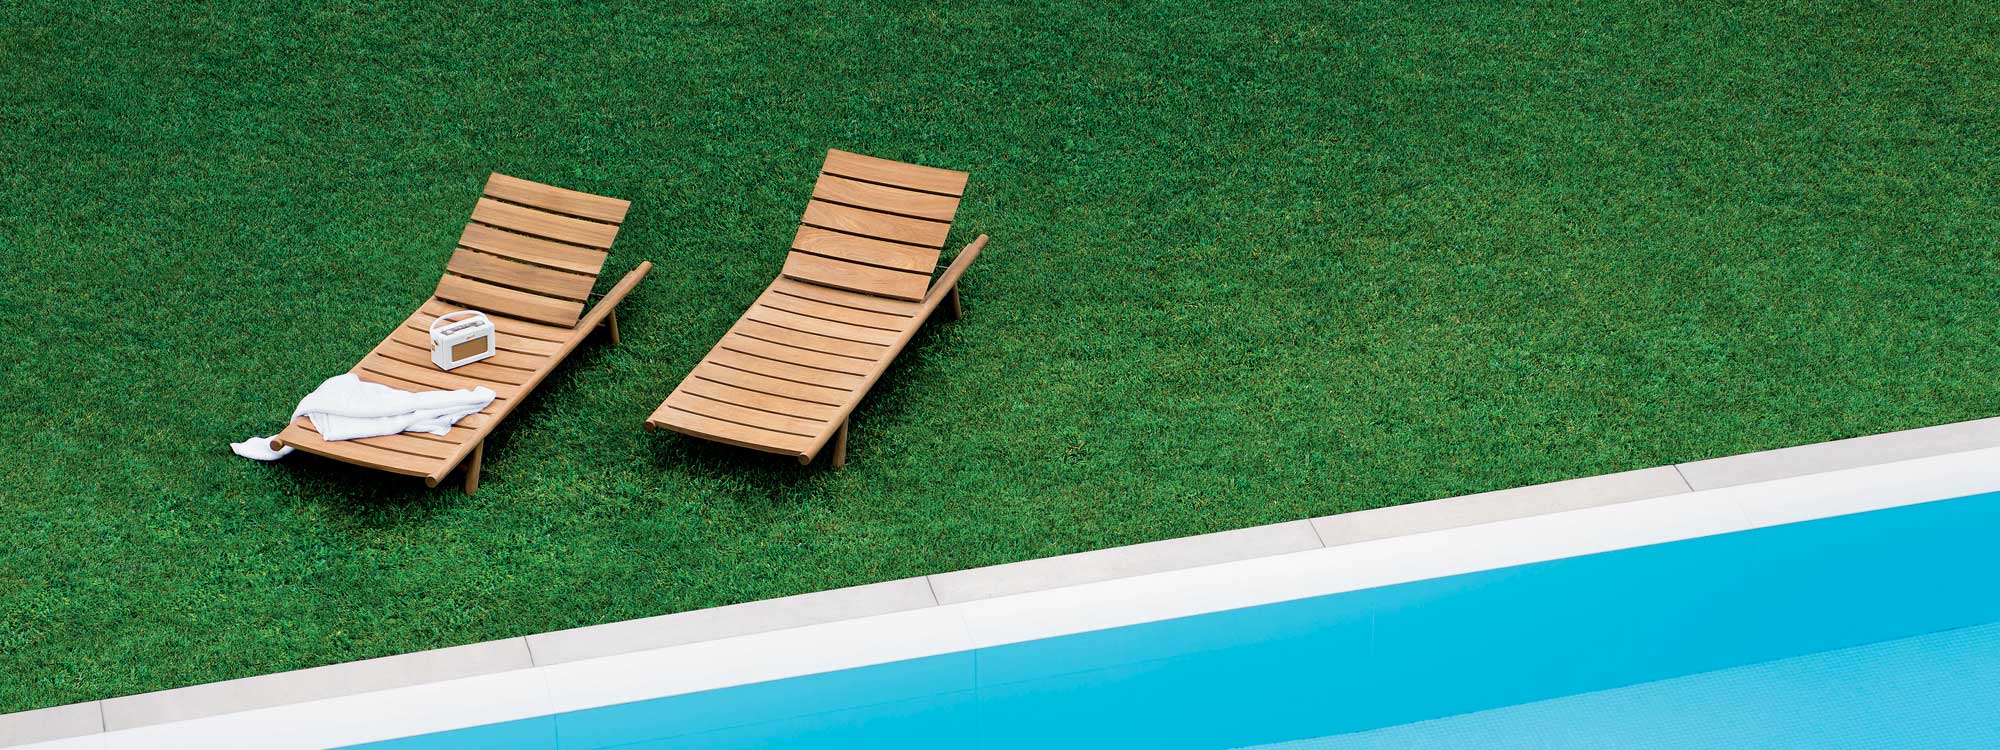 Image of aerial view of 2 RODA Orson teak sun loungers on green lawn next to swimming pool